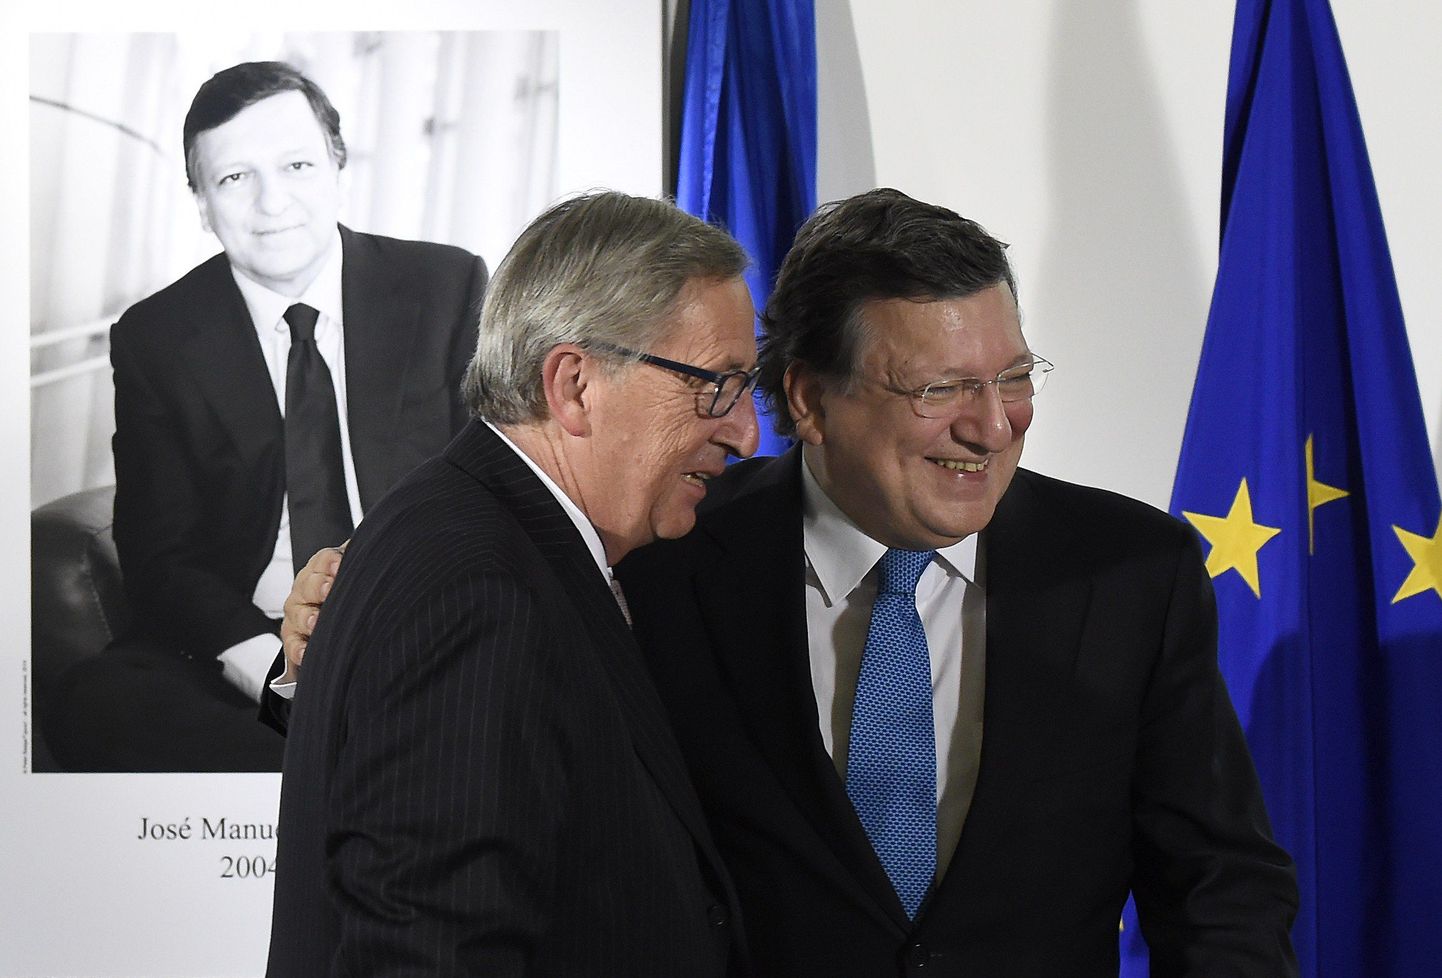 Outgoing EU Commission head Jose Manuel Barroso (R) embraces EU president-elect Jean-Claude Juncker at the EU headquarters in Brussels on October 30, 2014 after unveiling a portrait of Barroso to be exhibited in the Presidential Gallery of the Berlaymont building as part of a symbolic gesture in the handover of the EU Commission presidency. AFP PHOTO/JOHN THYS